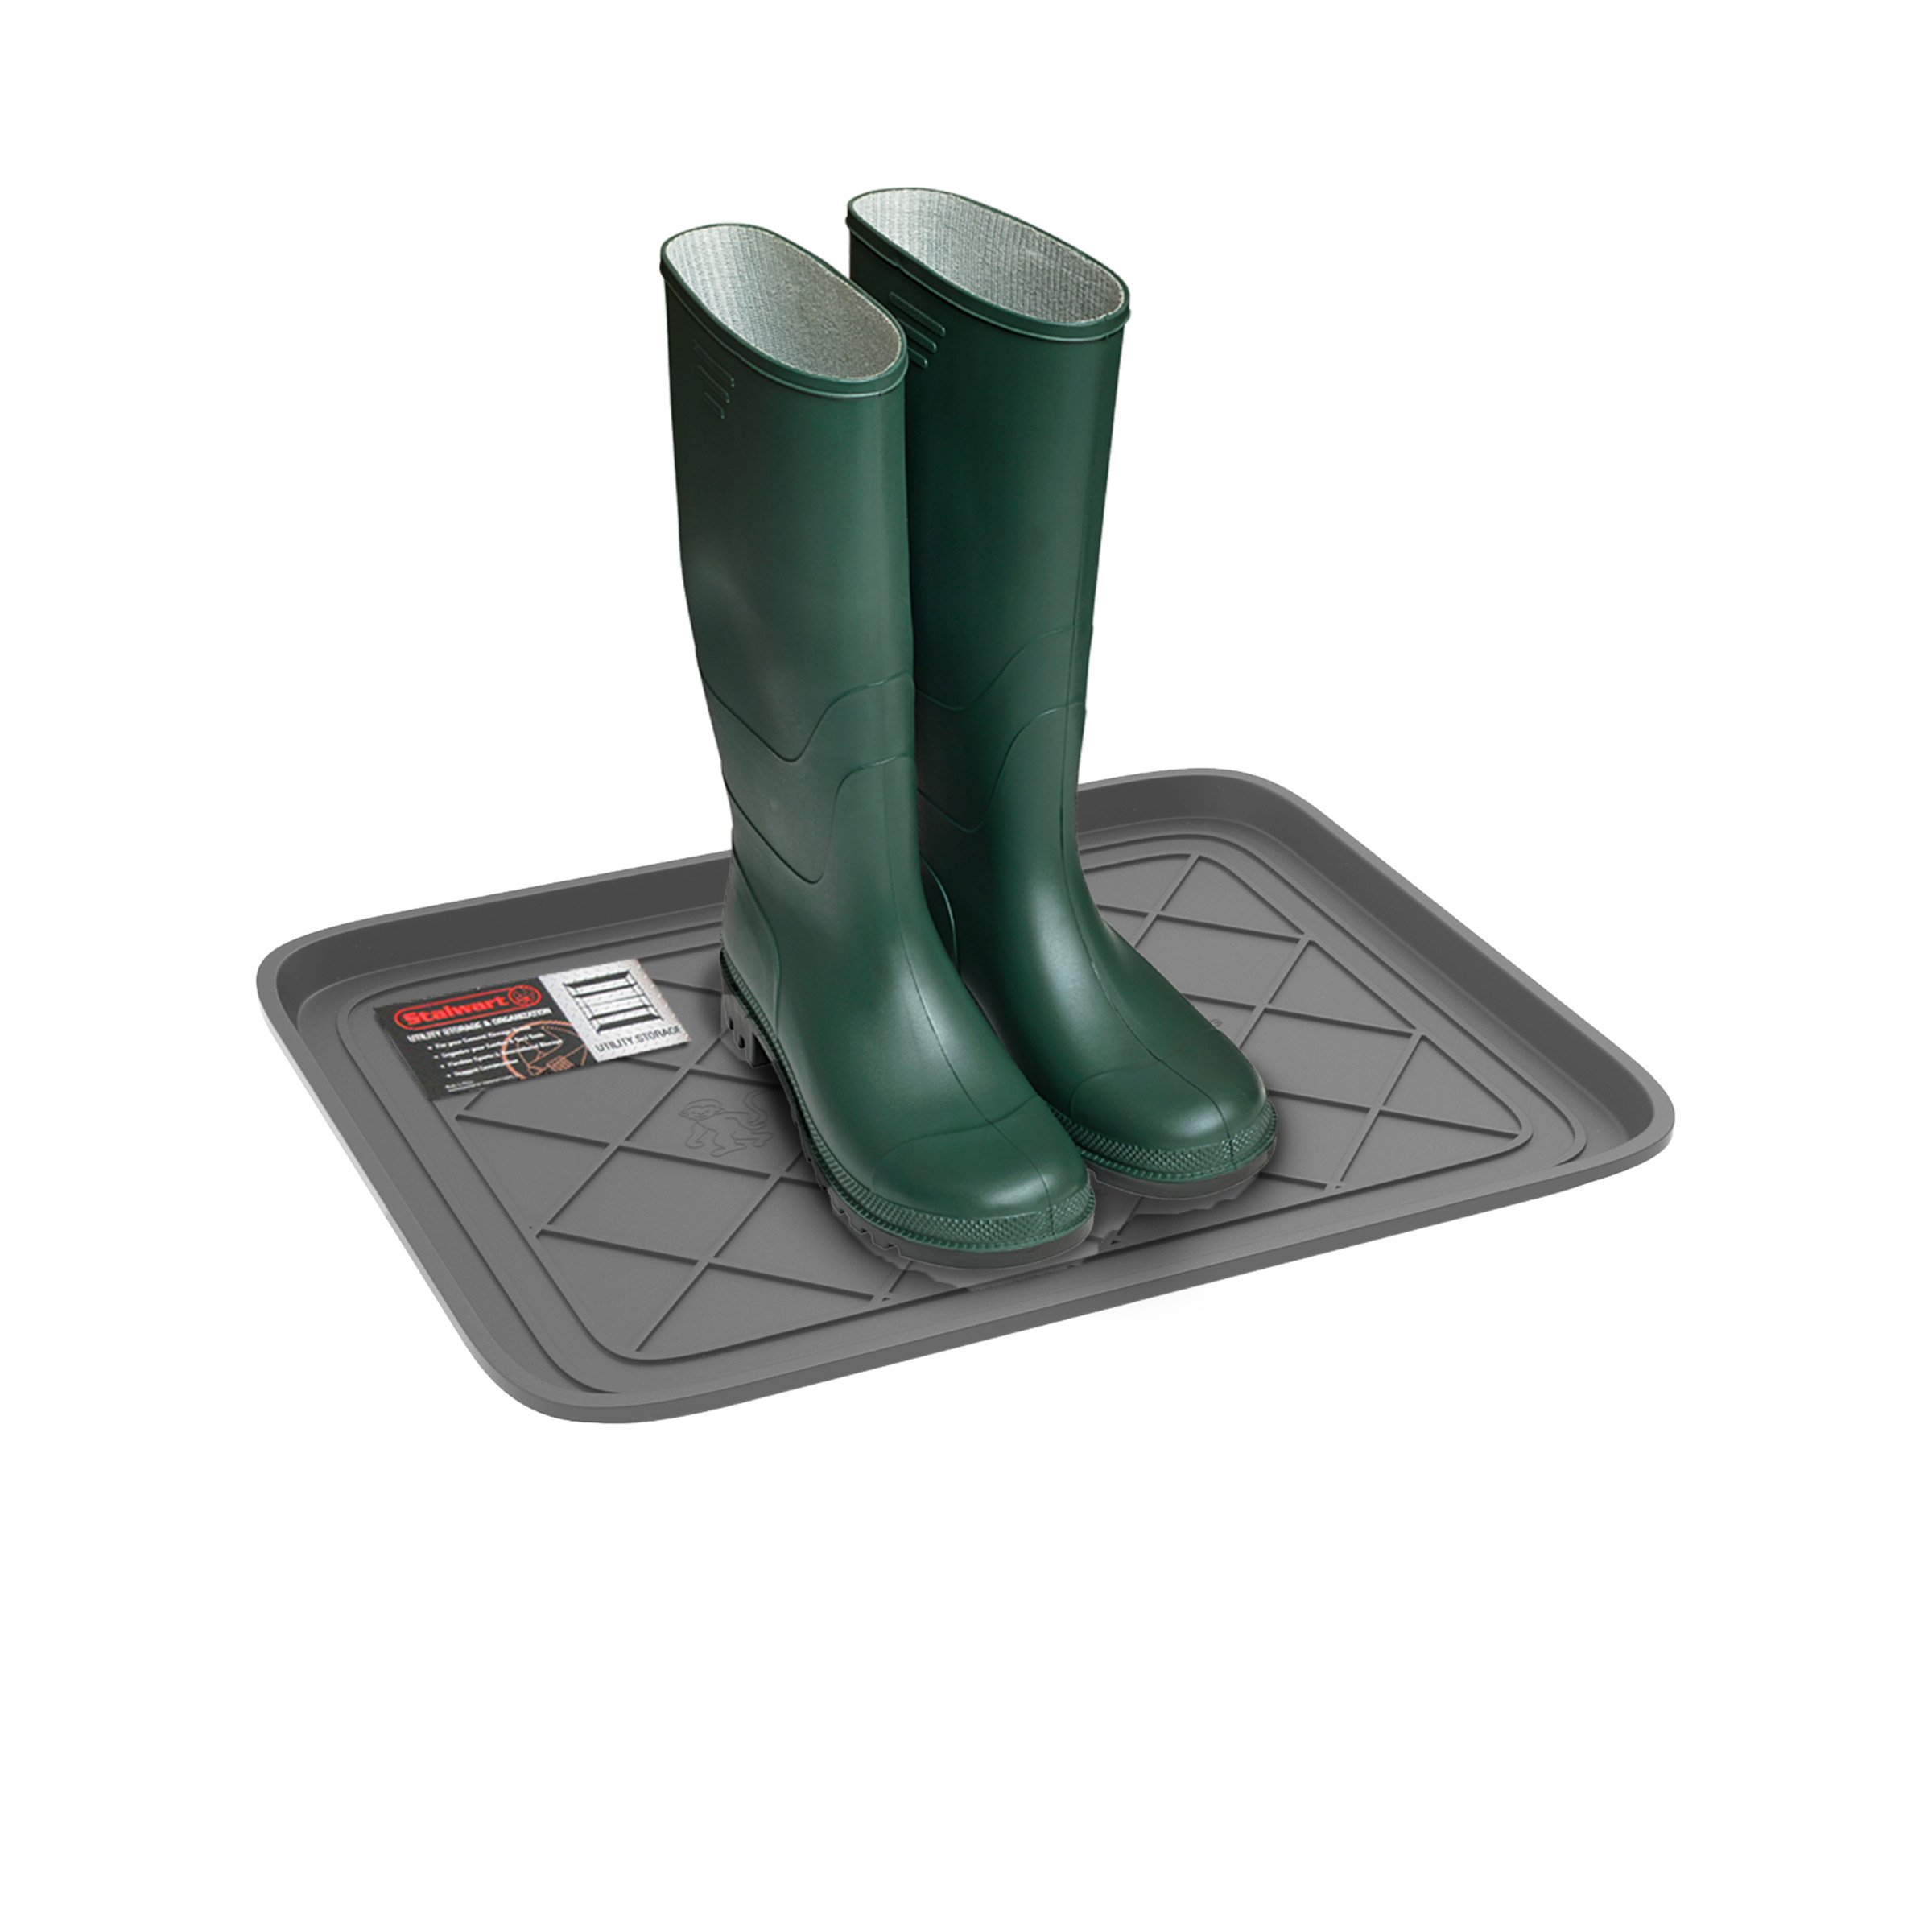 Gray Utility Boot Tray Paint Floor Protection Waterproof Recycled Plastics Eco Friendly 19.75 X 15.5 Inch